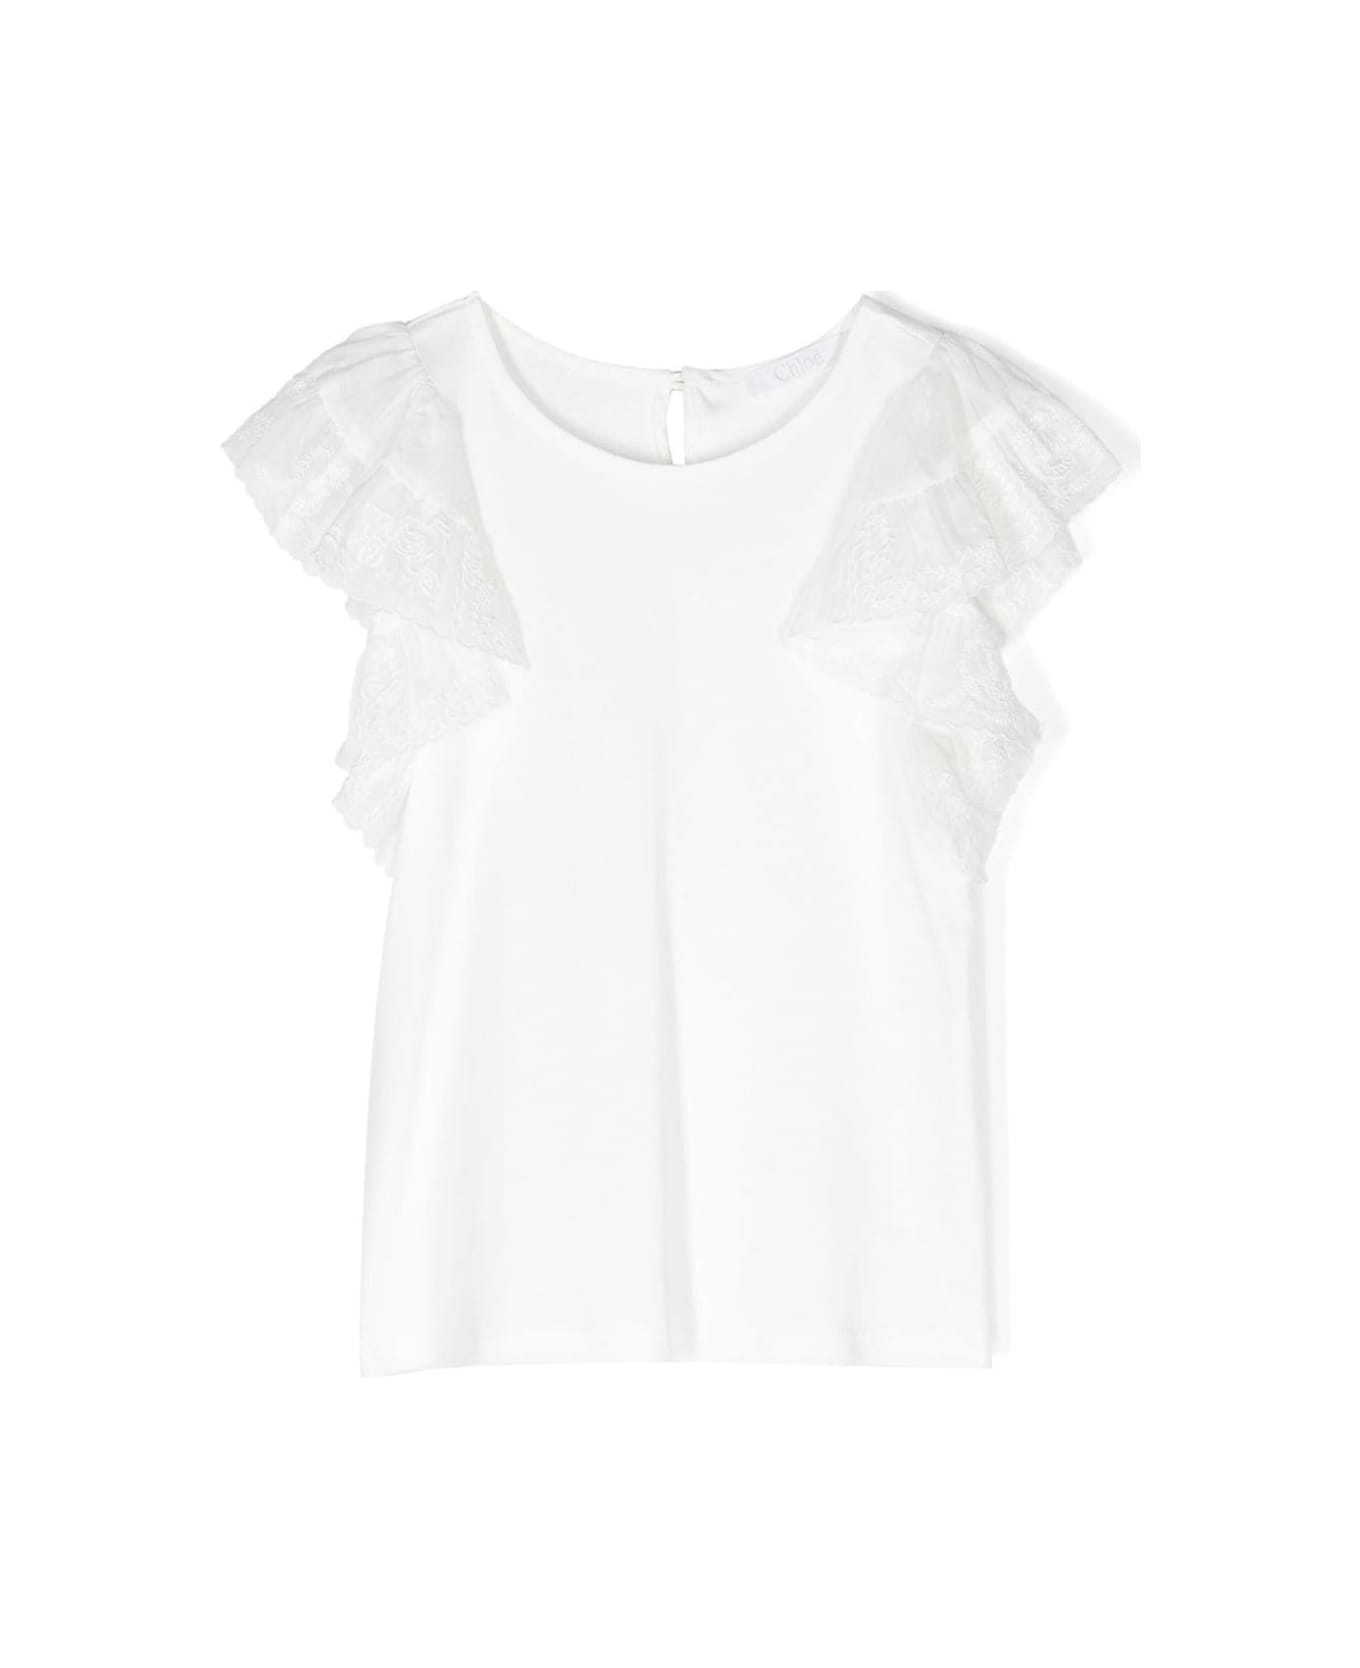 Chloé White Crewneck Top With Lace Ruched Detailing In Cotton Girl - White トップス